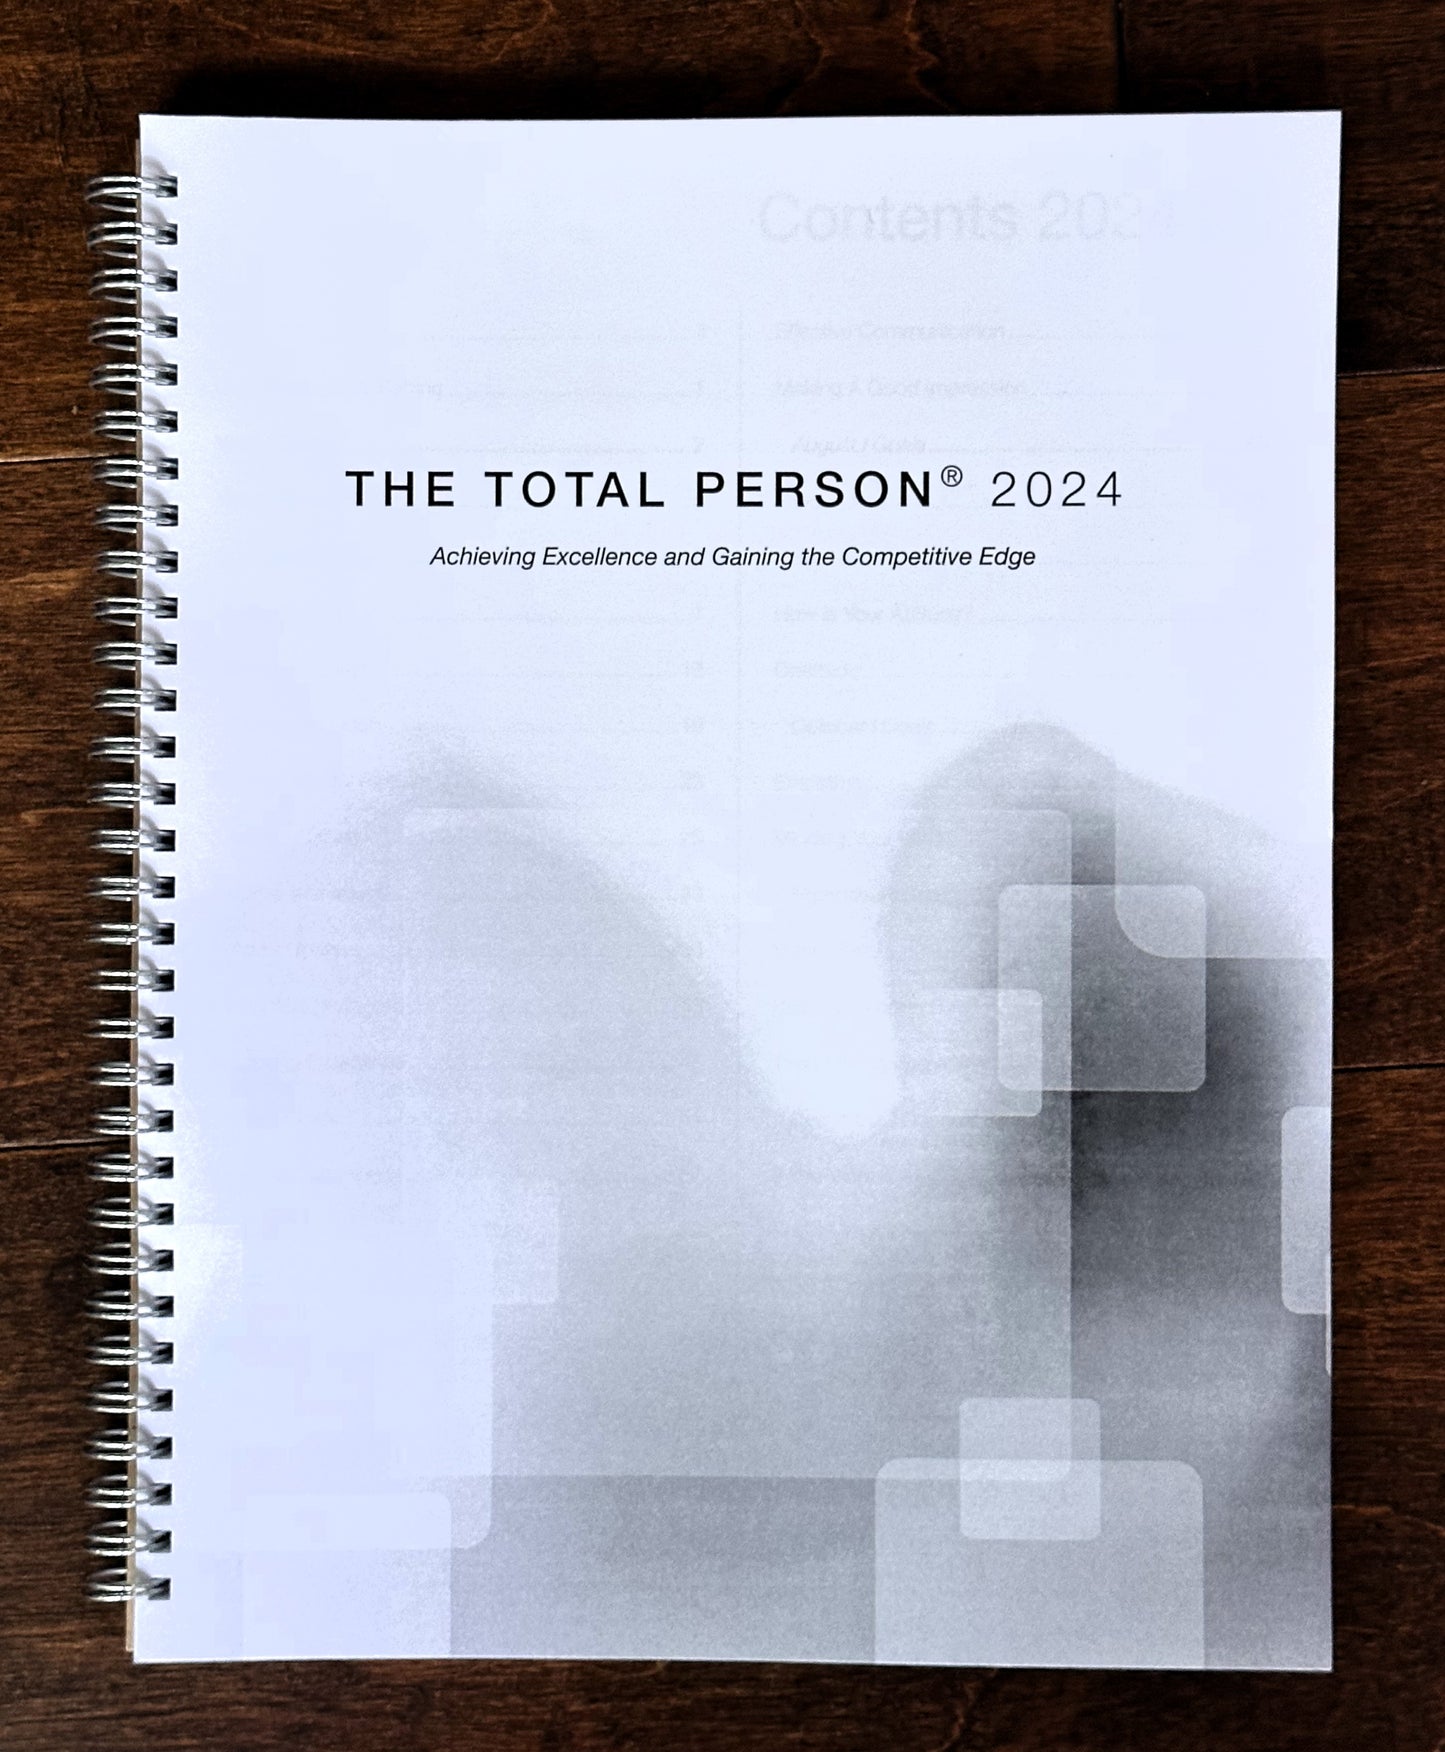 THE TOTAL PERSON®